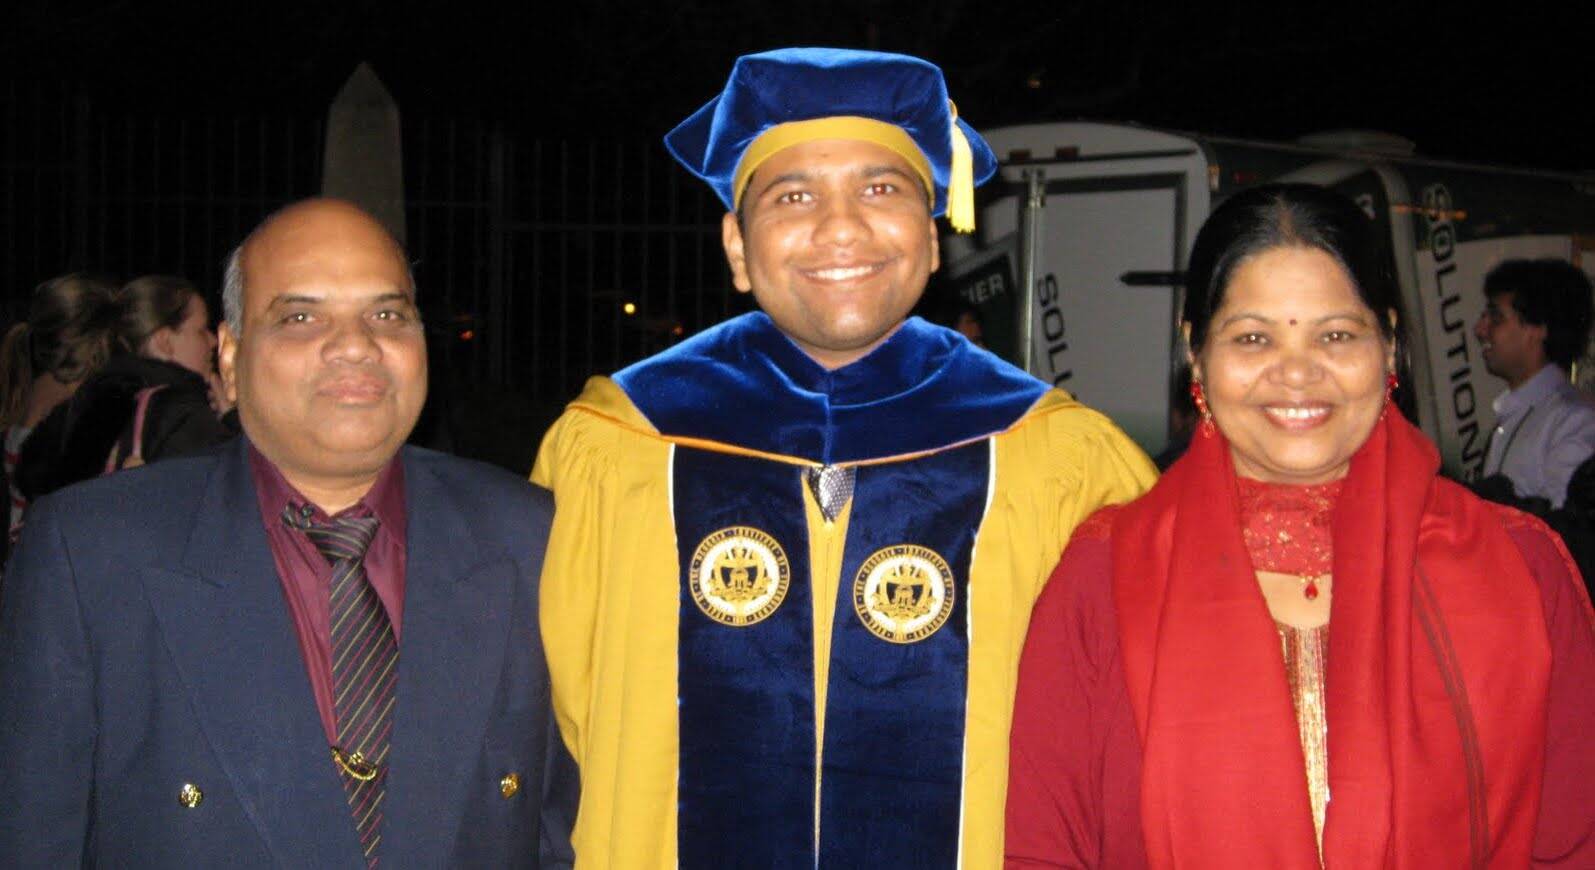 Dhaval Bhandari in a graduation cap and gown with his family